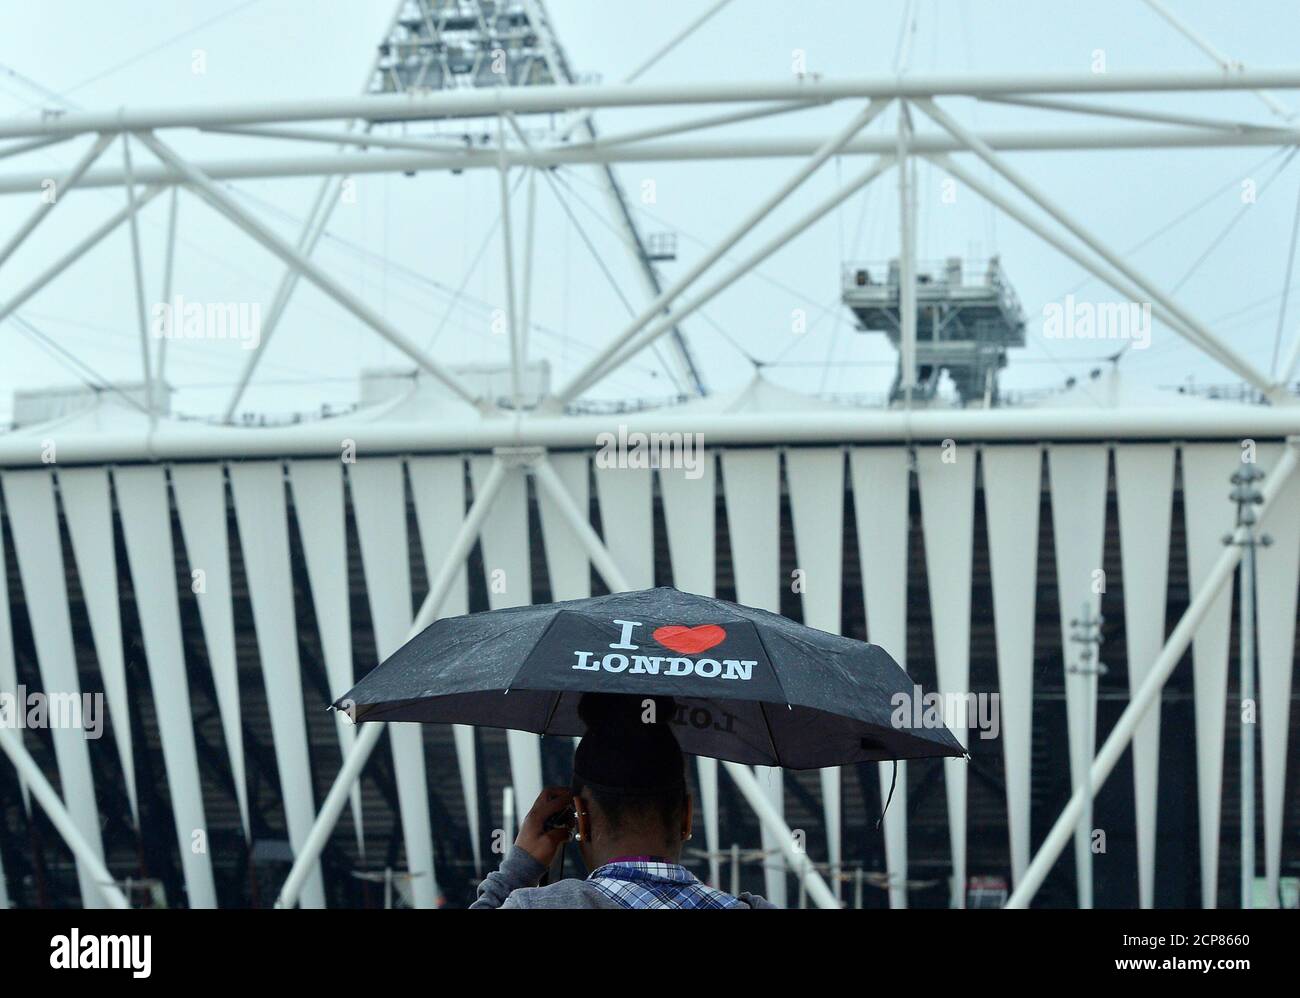 A worker uses an umbrella outside the Olympic Stadium at the Olympic Park in Stratford, the location of the London 2012 Olympic Games, in east London July 20, 2012. REUTERS/Toby Melville  (BRITAIN - Tags: SPORT OLYMPICS) Stock Photo